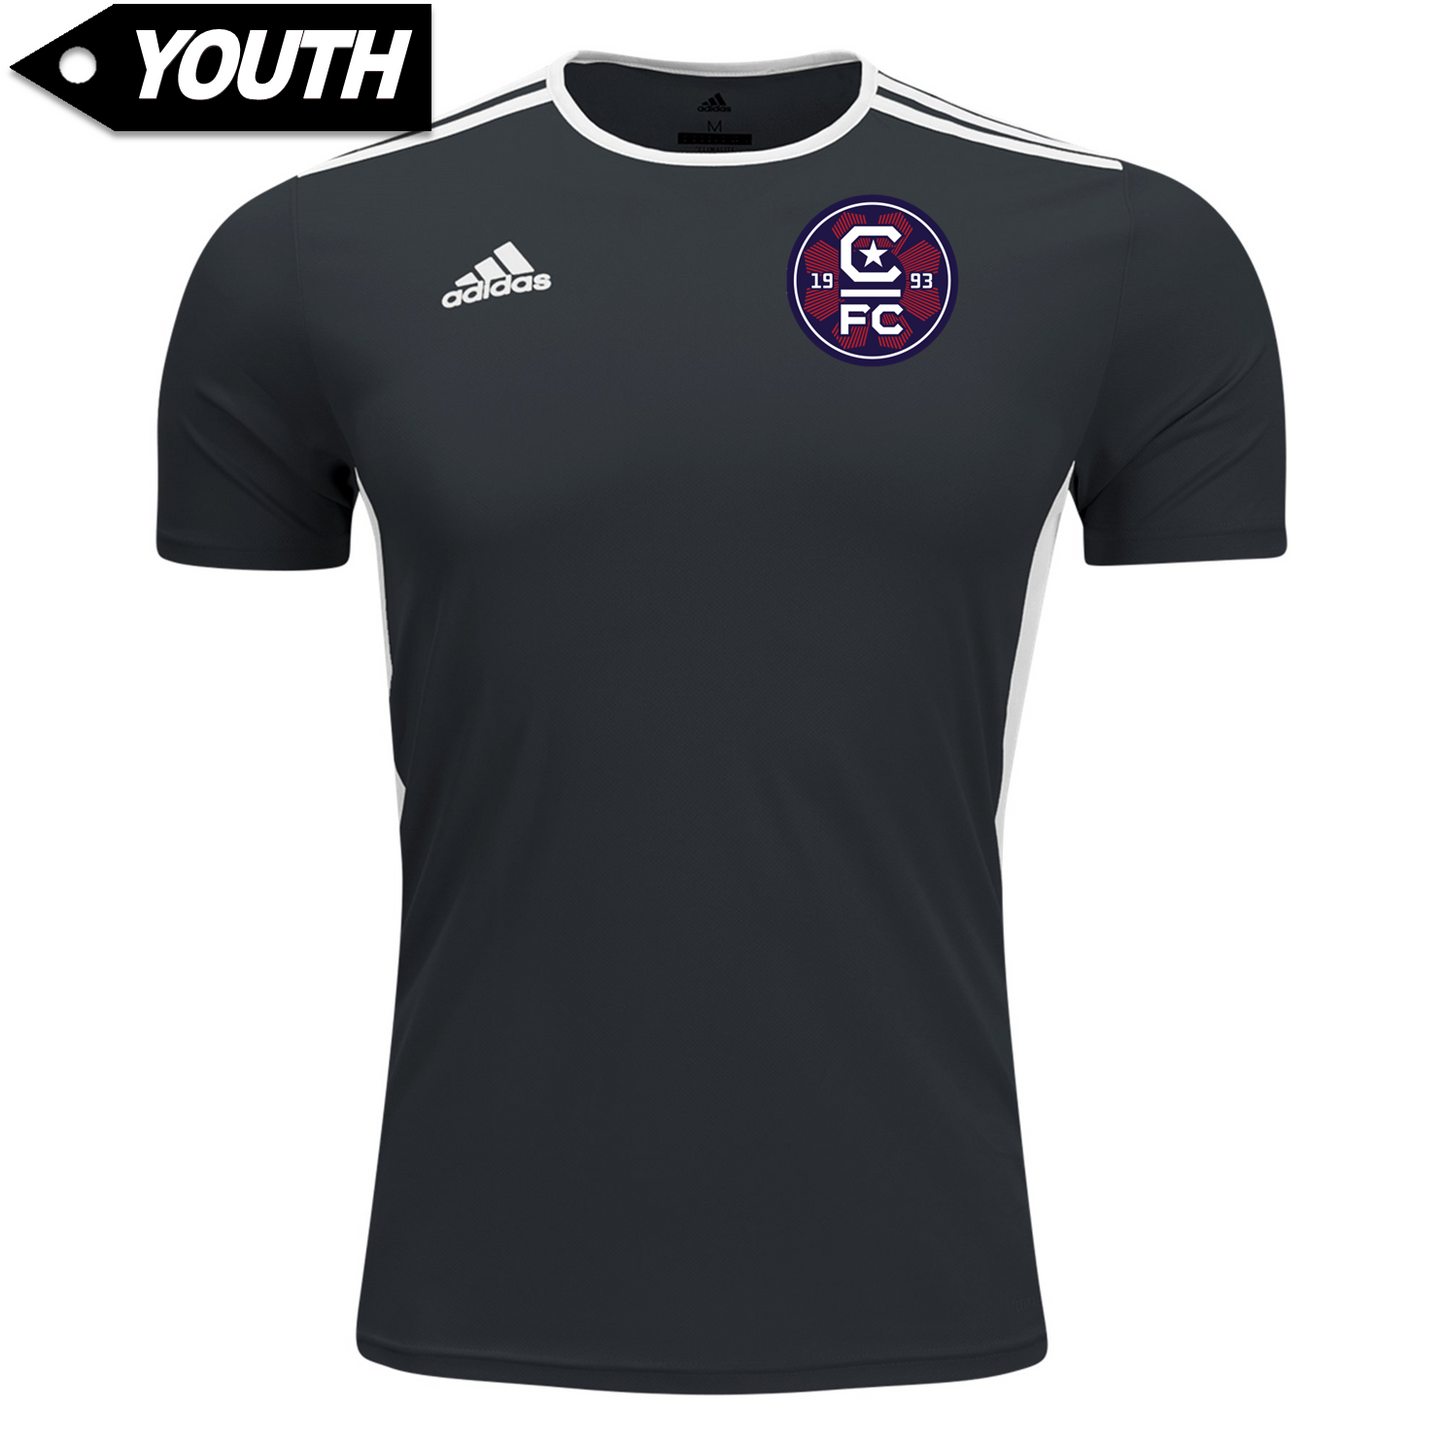 Capital FC Training Top [Youth]